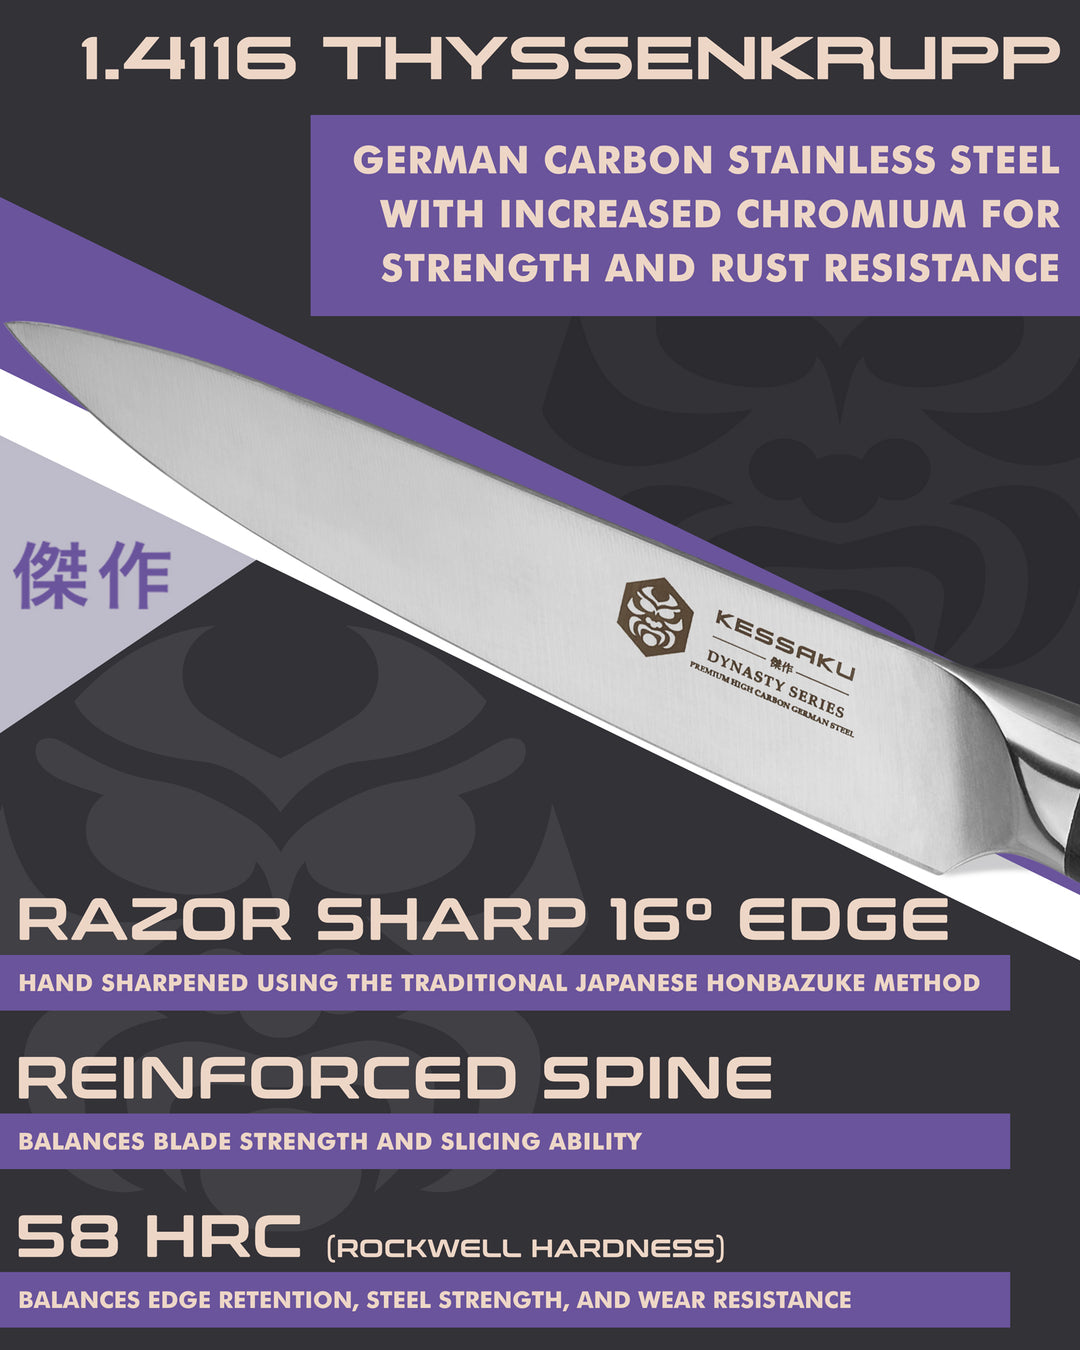 Kessaku Dynasty Utility Knife blade features: 1.4116 German steel, 58 HRC, sharpened to 16 degrees, reinforced spine